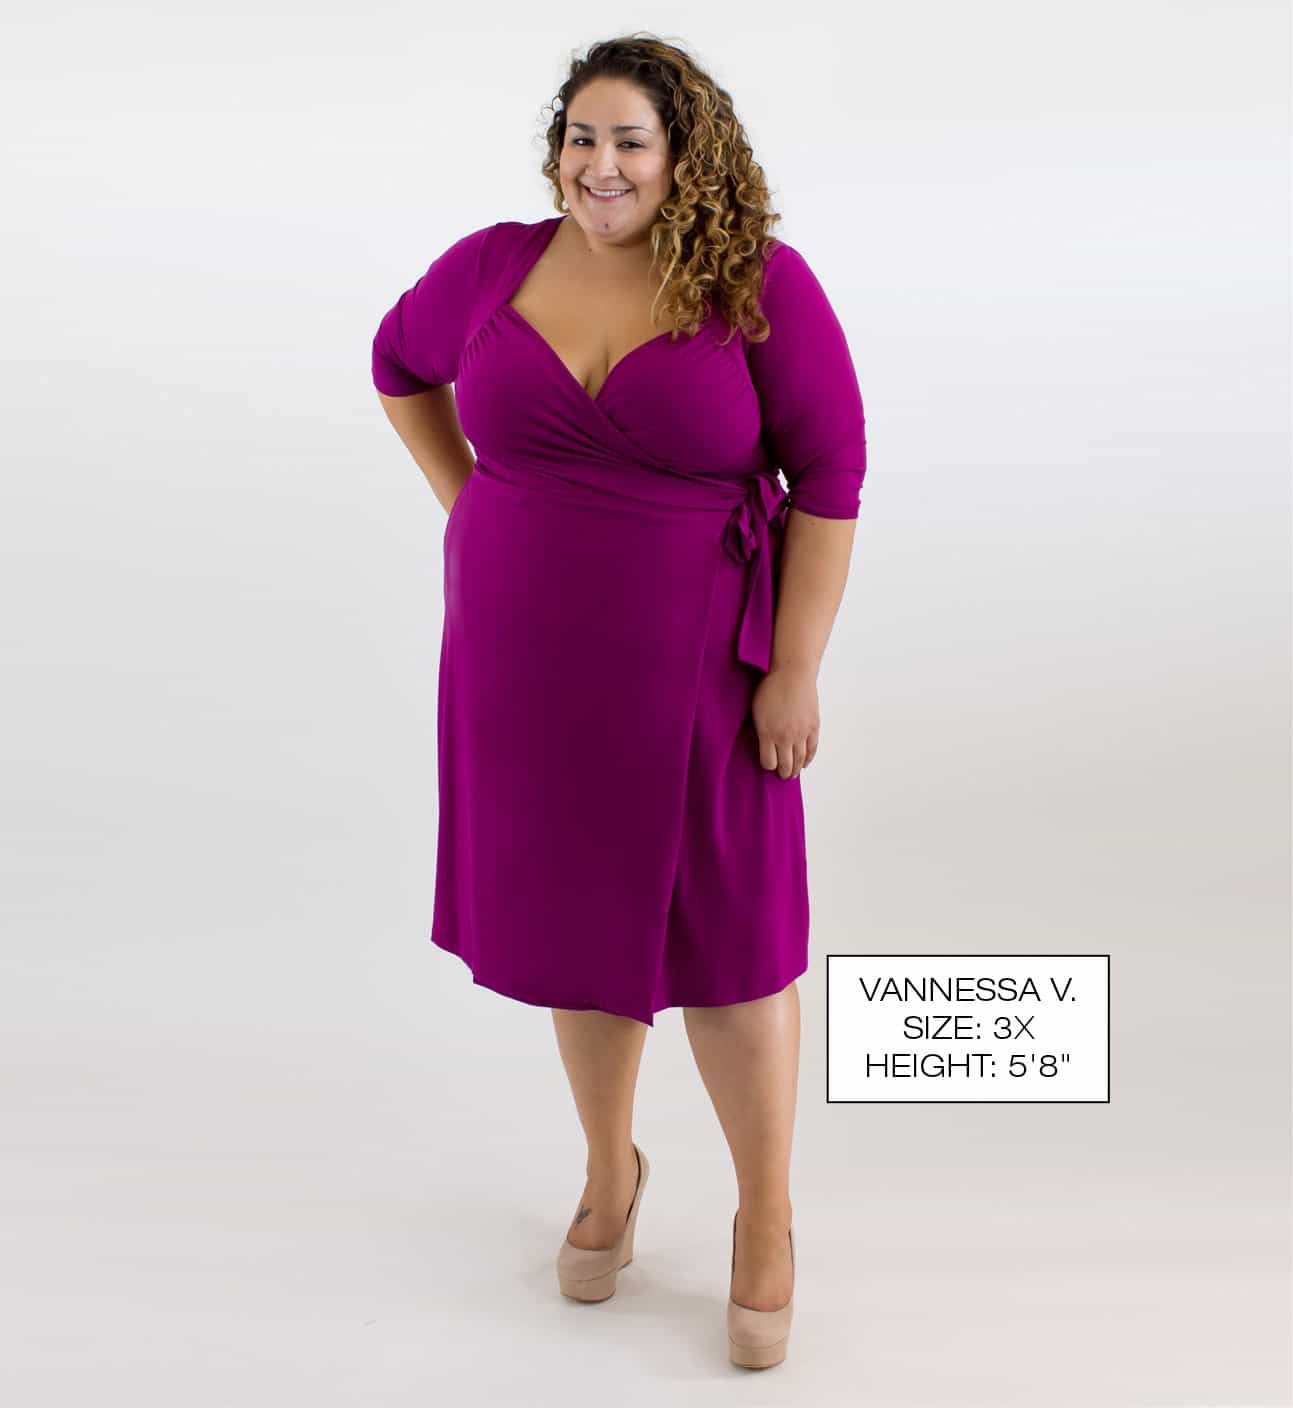 Download this Kiyonna Setting Precedent Showing Plus Size Fashion Real Women picture